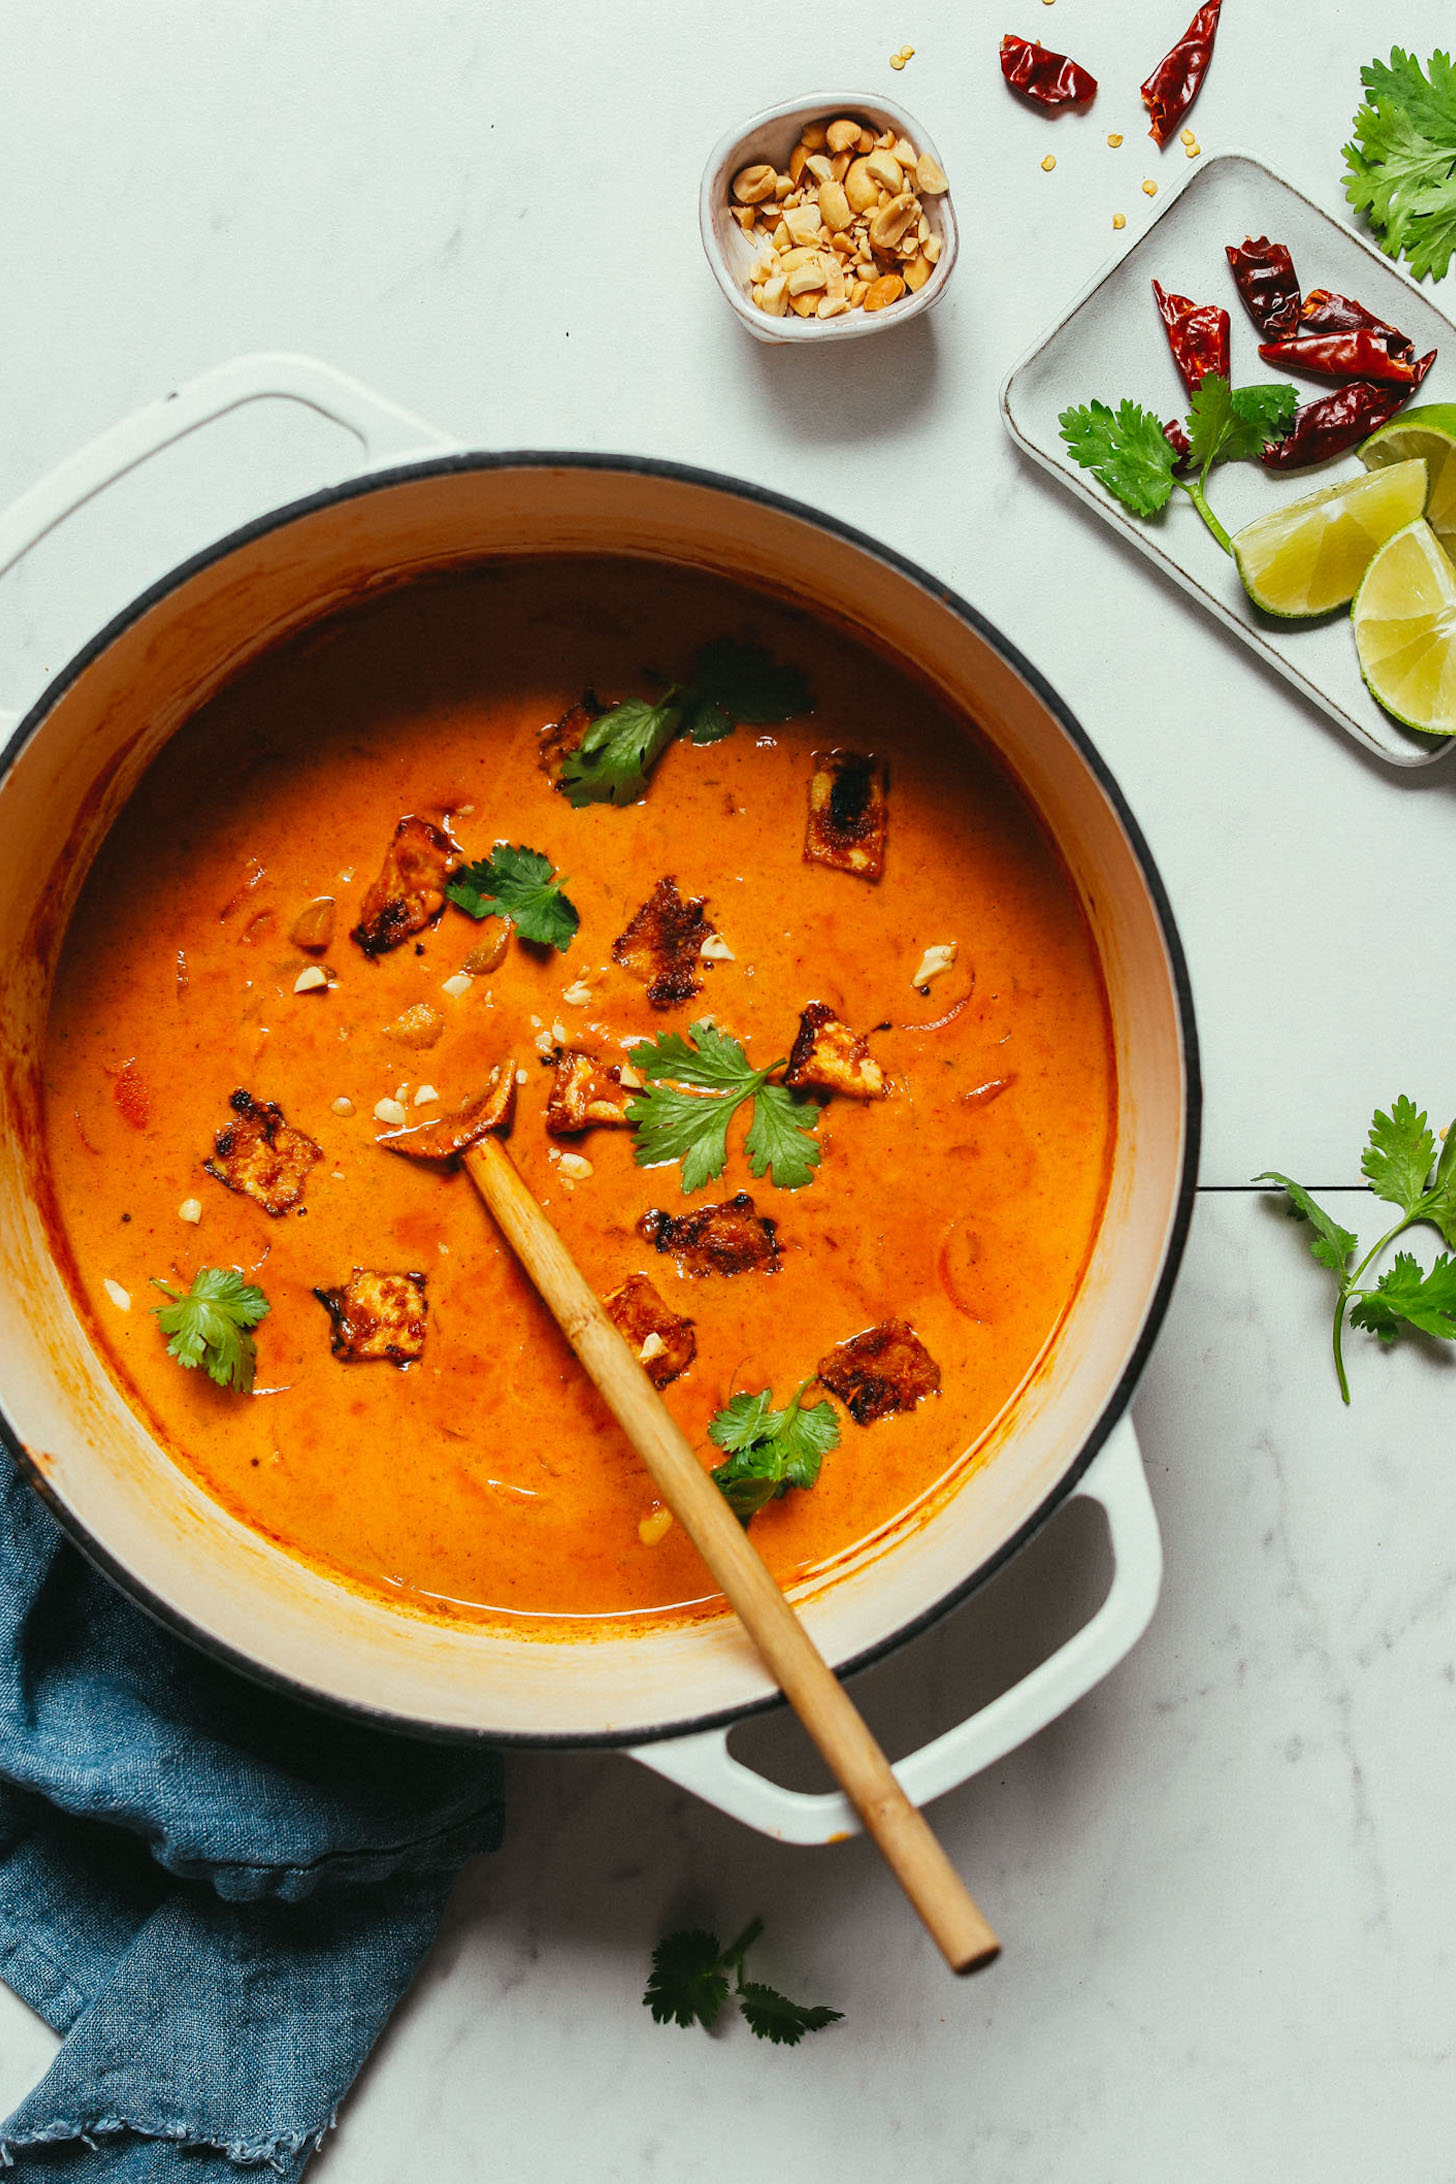 https://minimalistbaker.com/wp-content/uploads/2019/09/EASY-1-Pot-Massaman-Curry-Basic-ingredients-BIG-flavor-lots-of-protein-options-for-vegan-vegetarian-and-meat-eaters-plantbased-glutenfree-curry-massaman-recipe-minimalistbaker-34.jpg